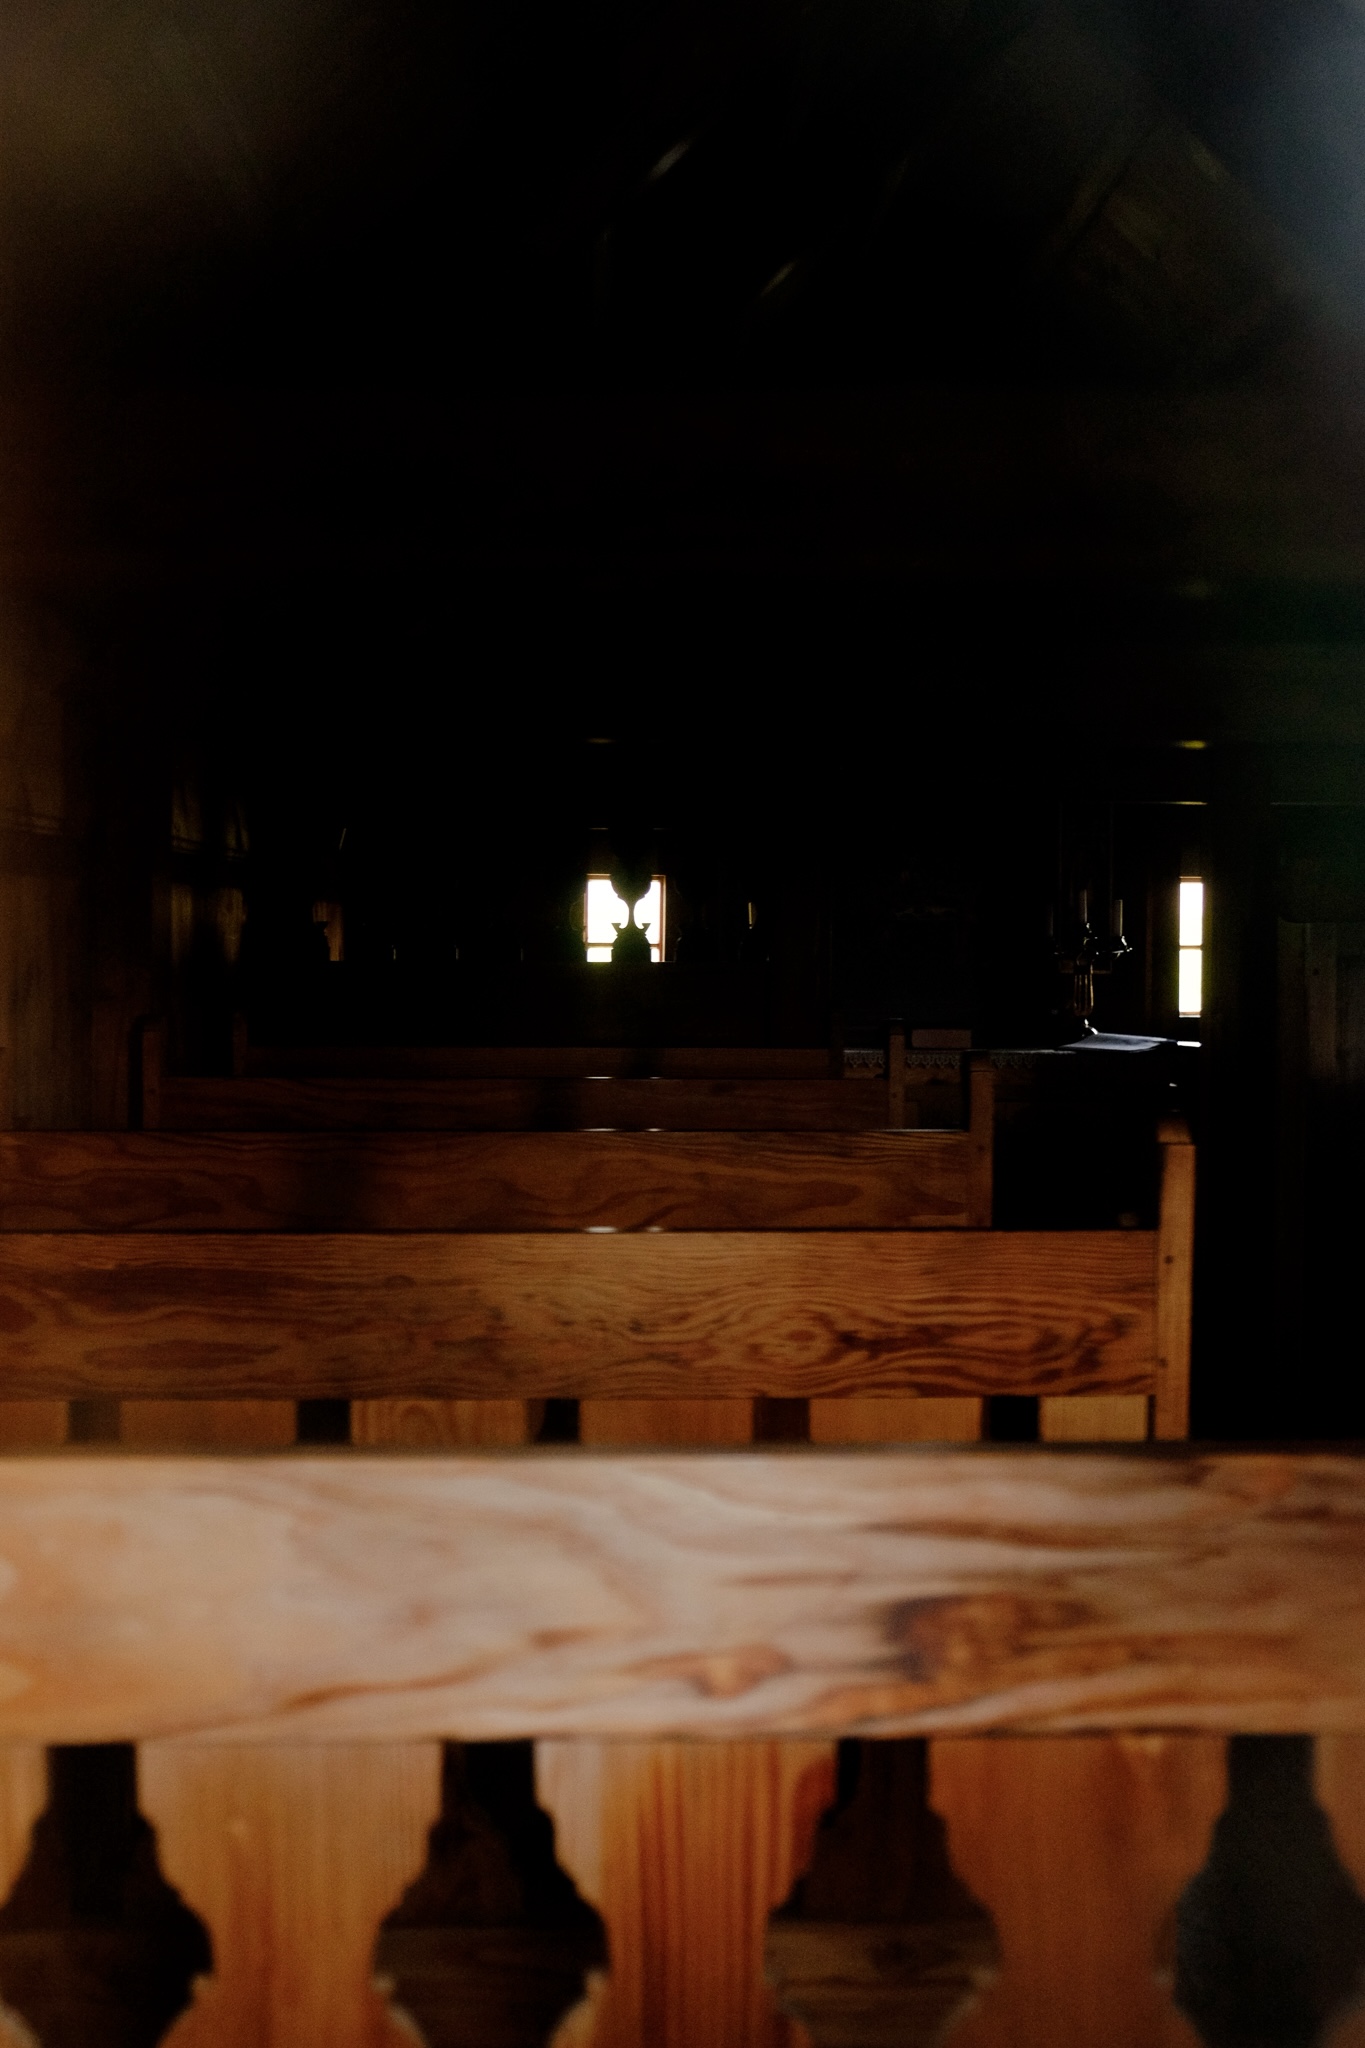 In the window of a church there are wooden pews, the background is dark as the light barely penetrates the interior from the few windows in the church